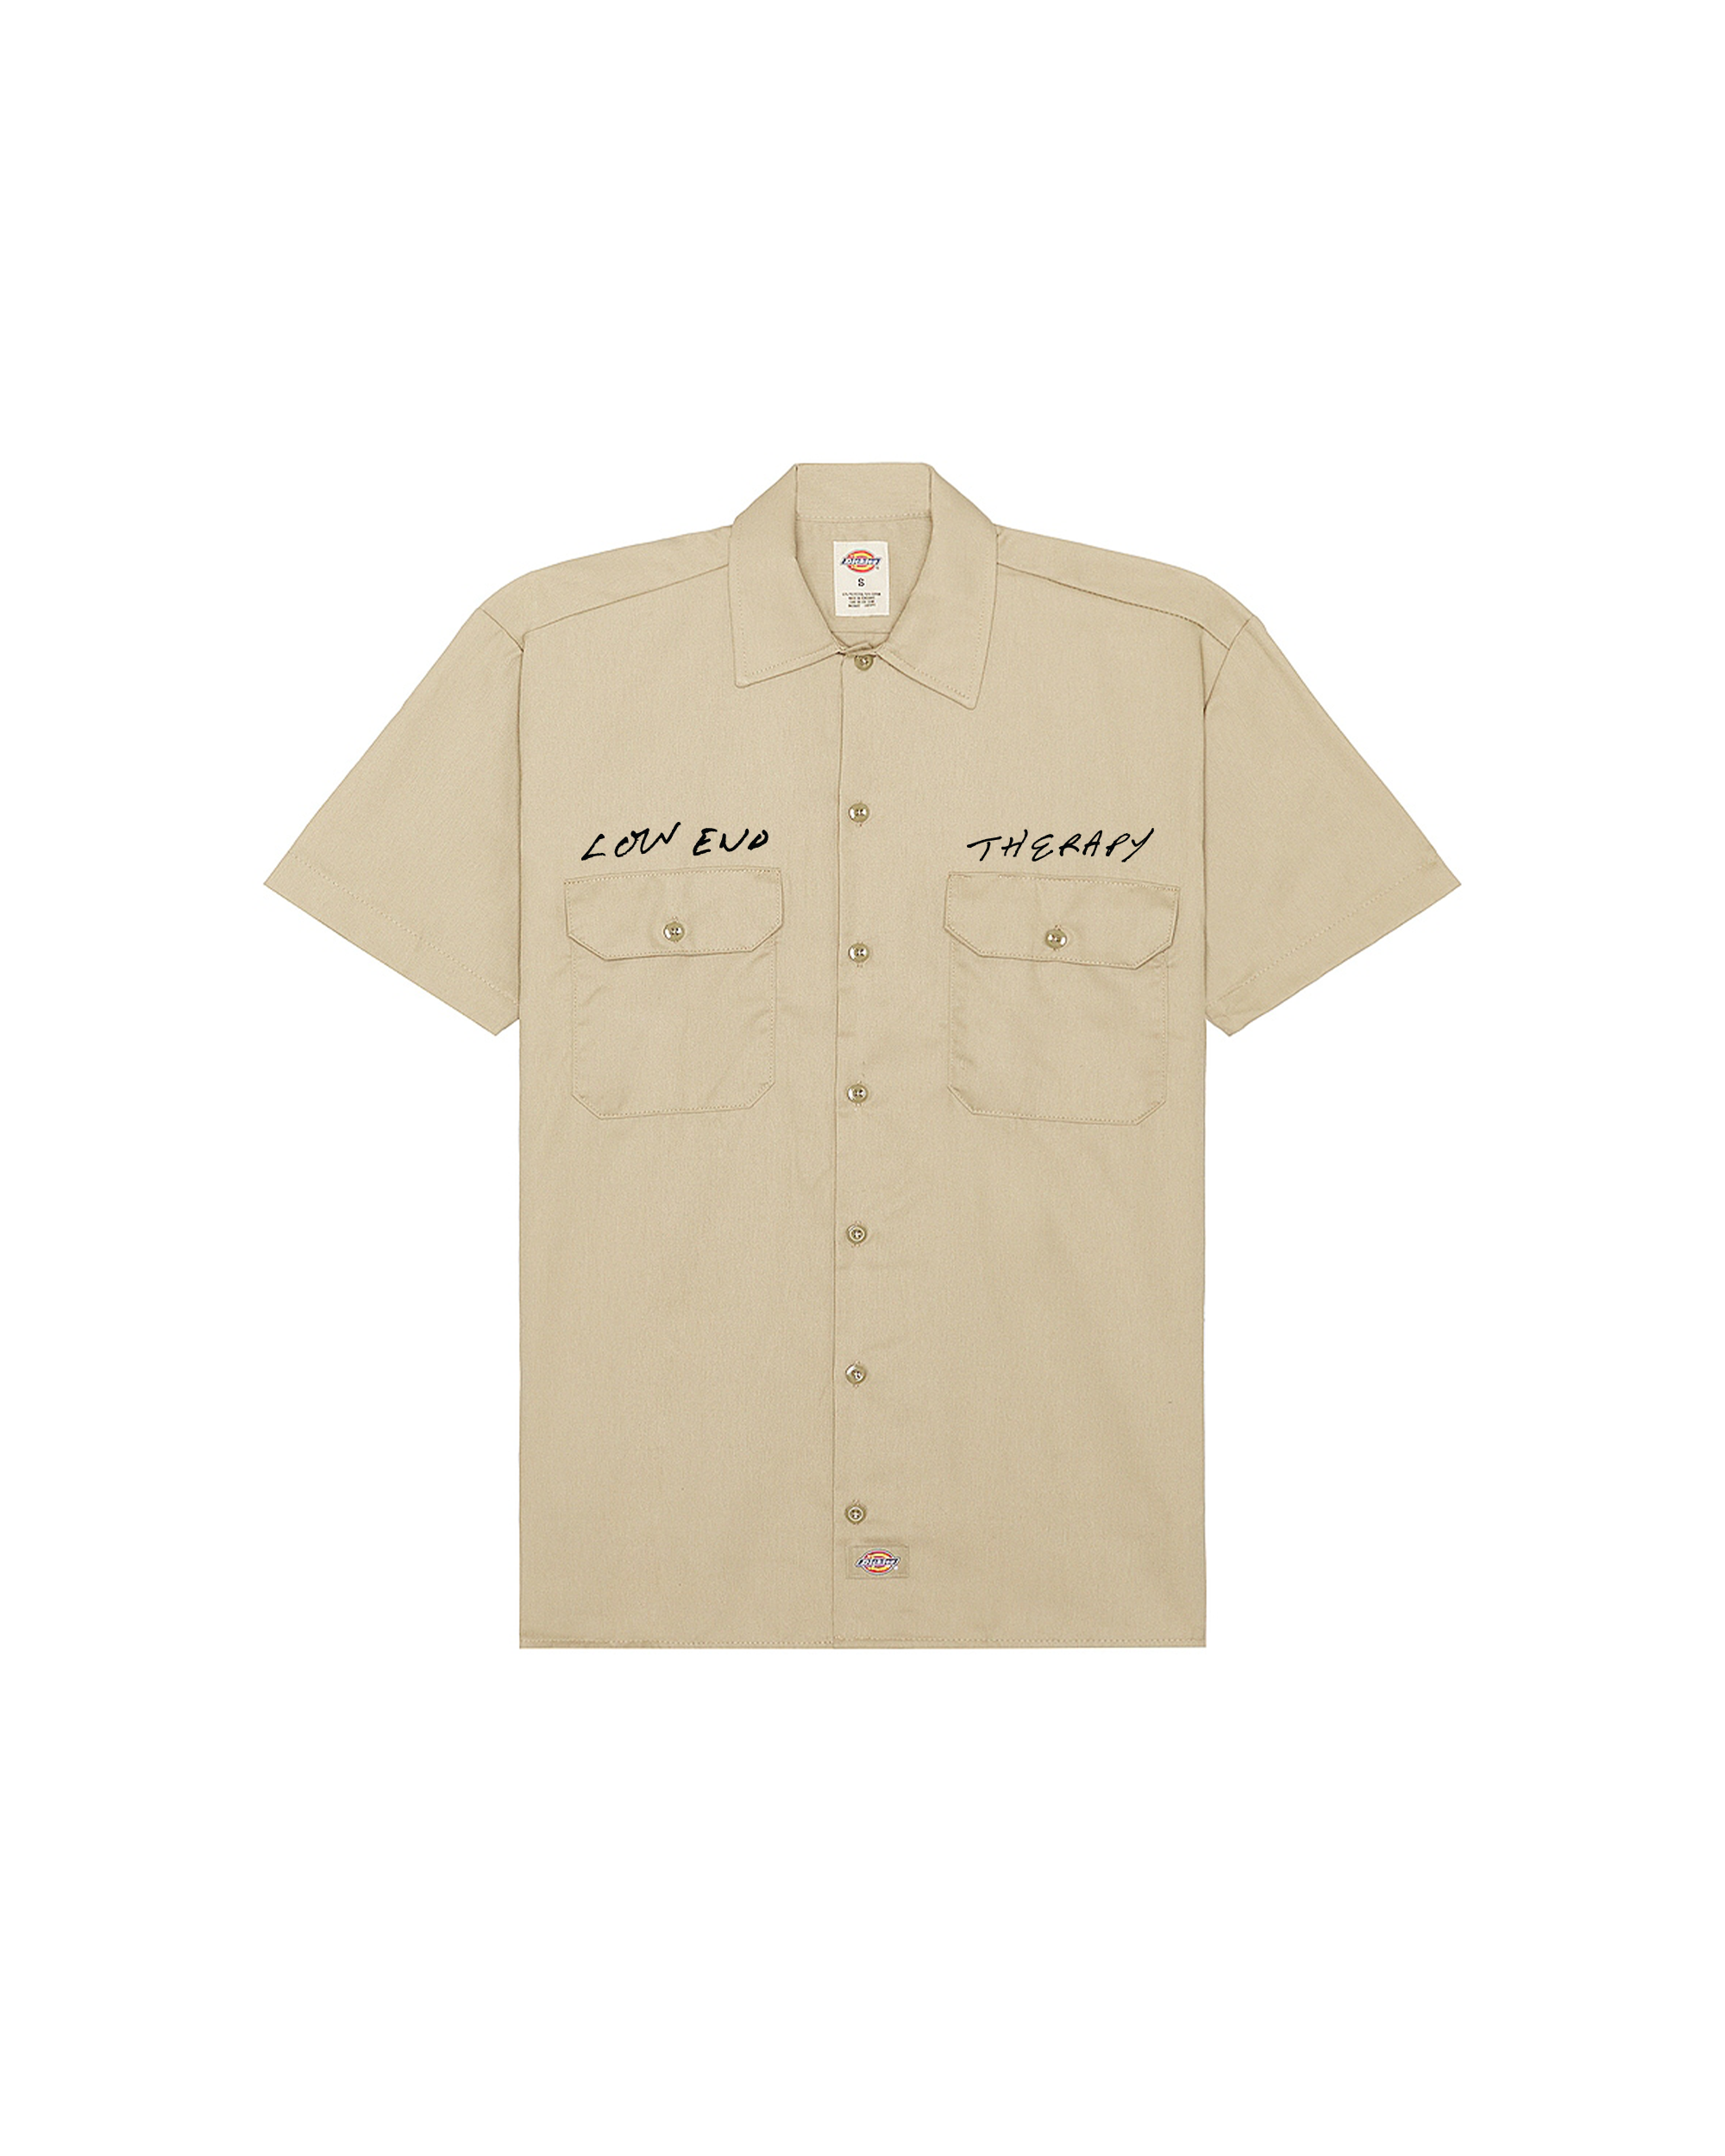 Therapy "Reloved" Dickies Work Shirt - Khaki